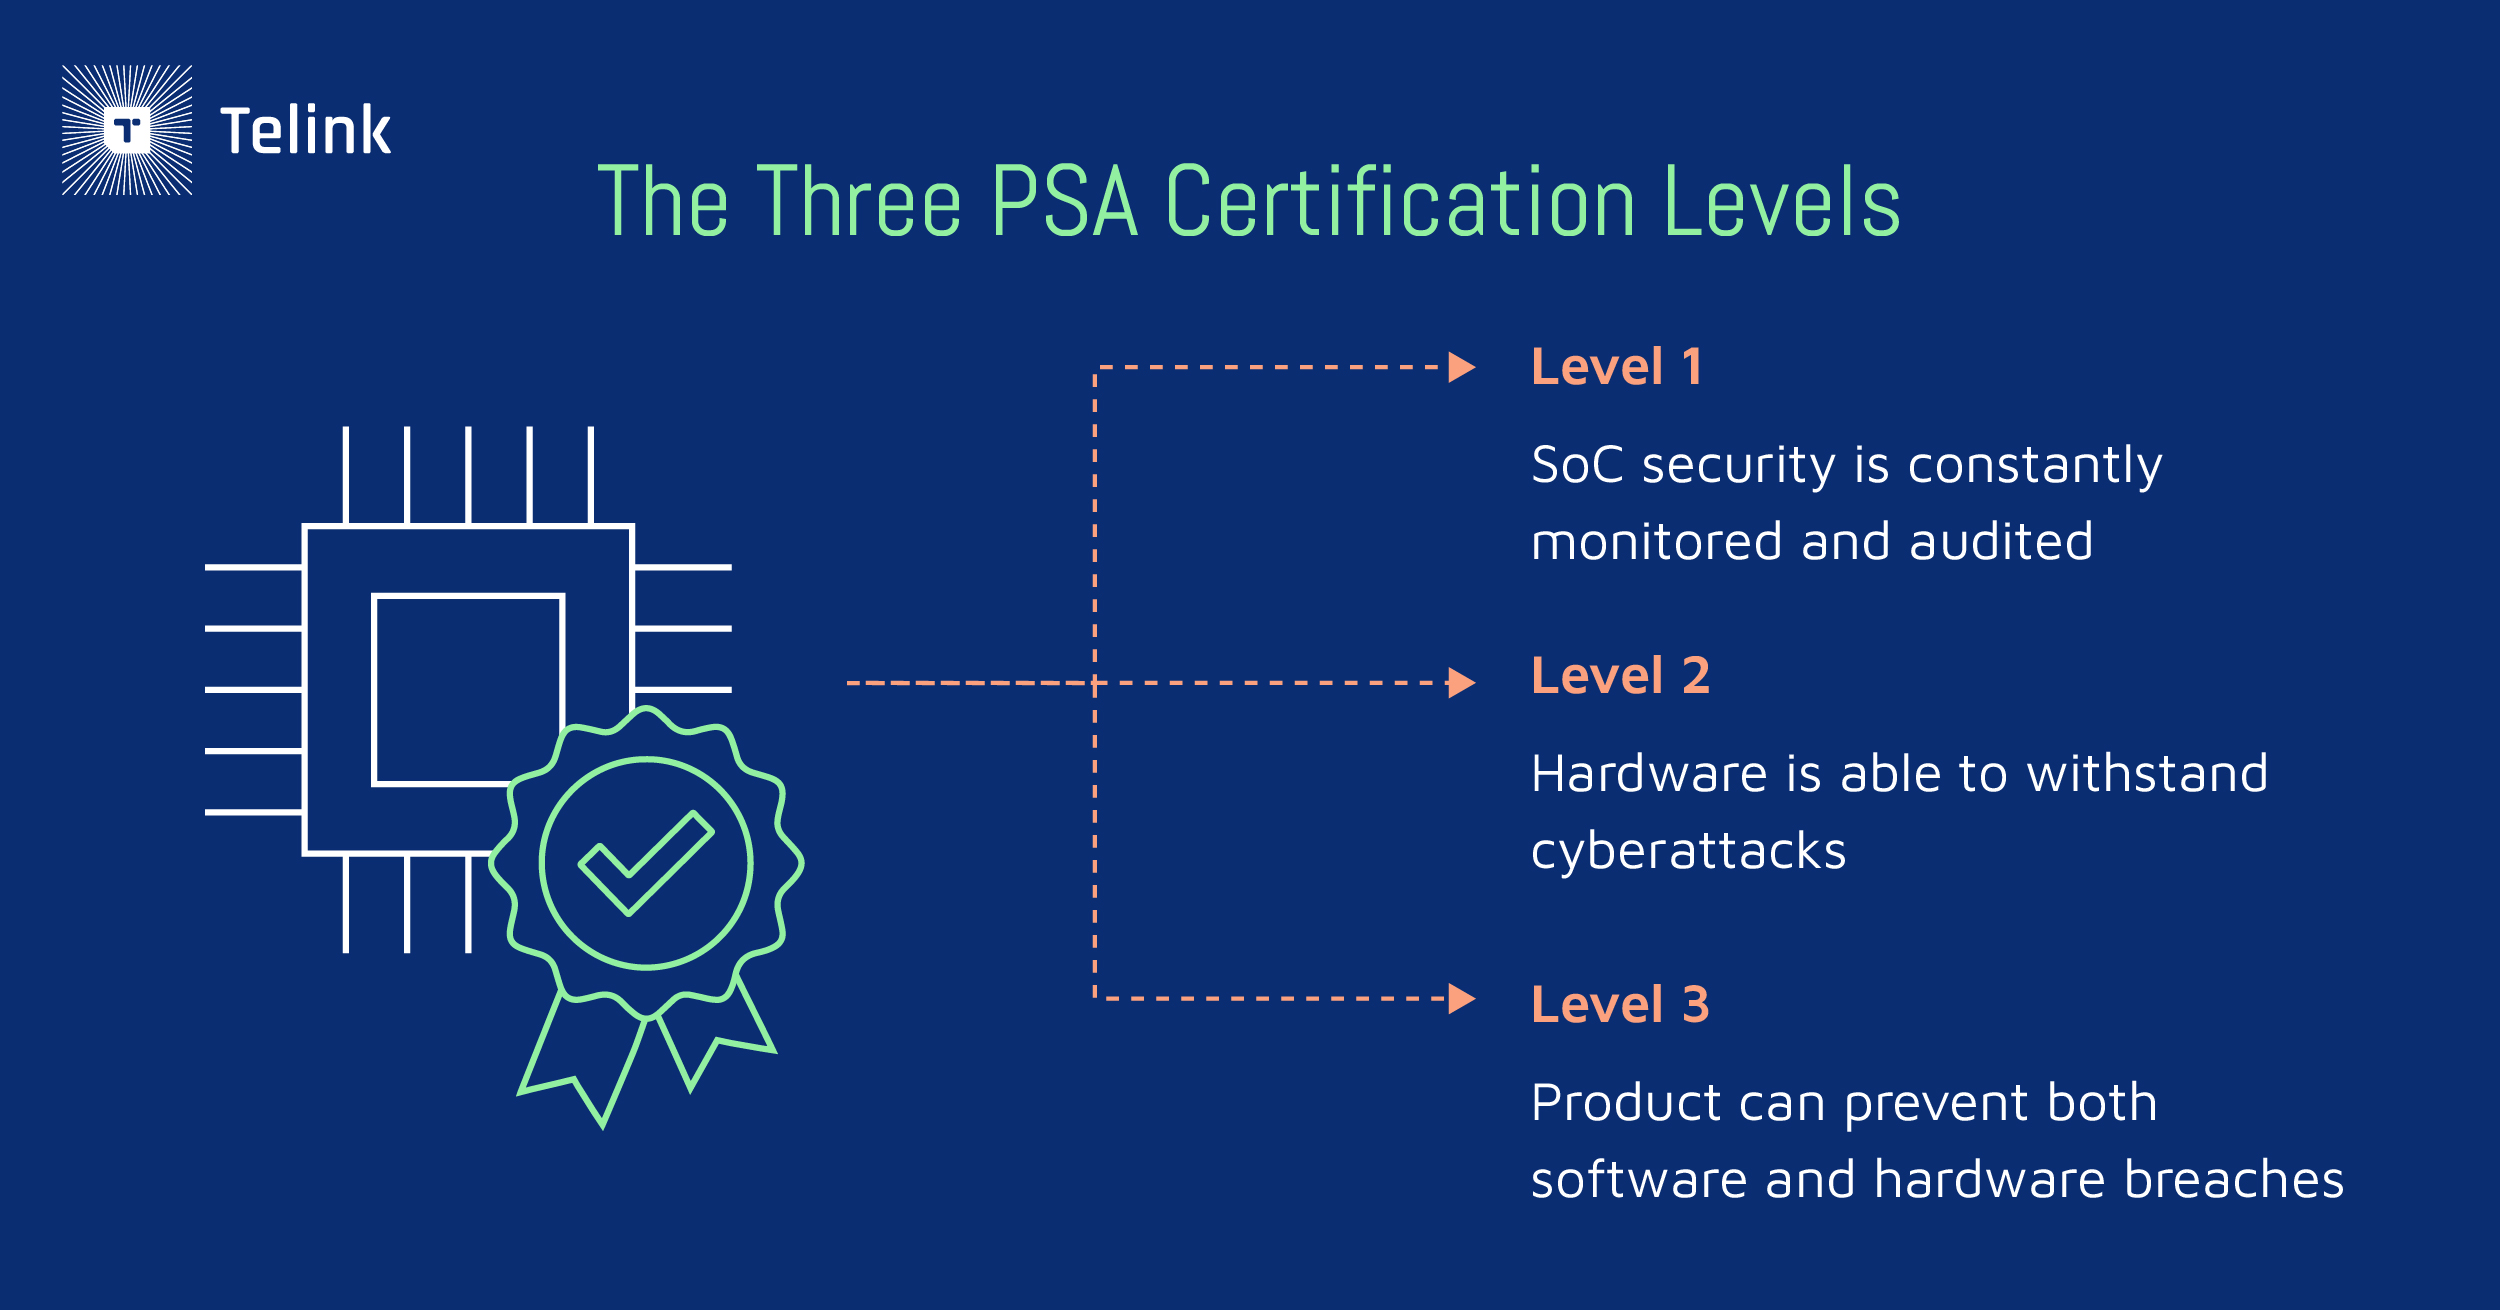 The three PSA certification levels